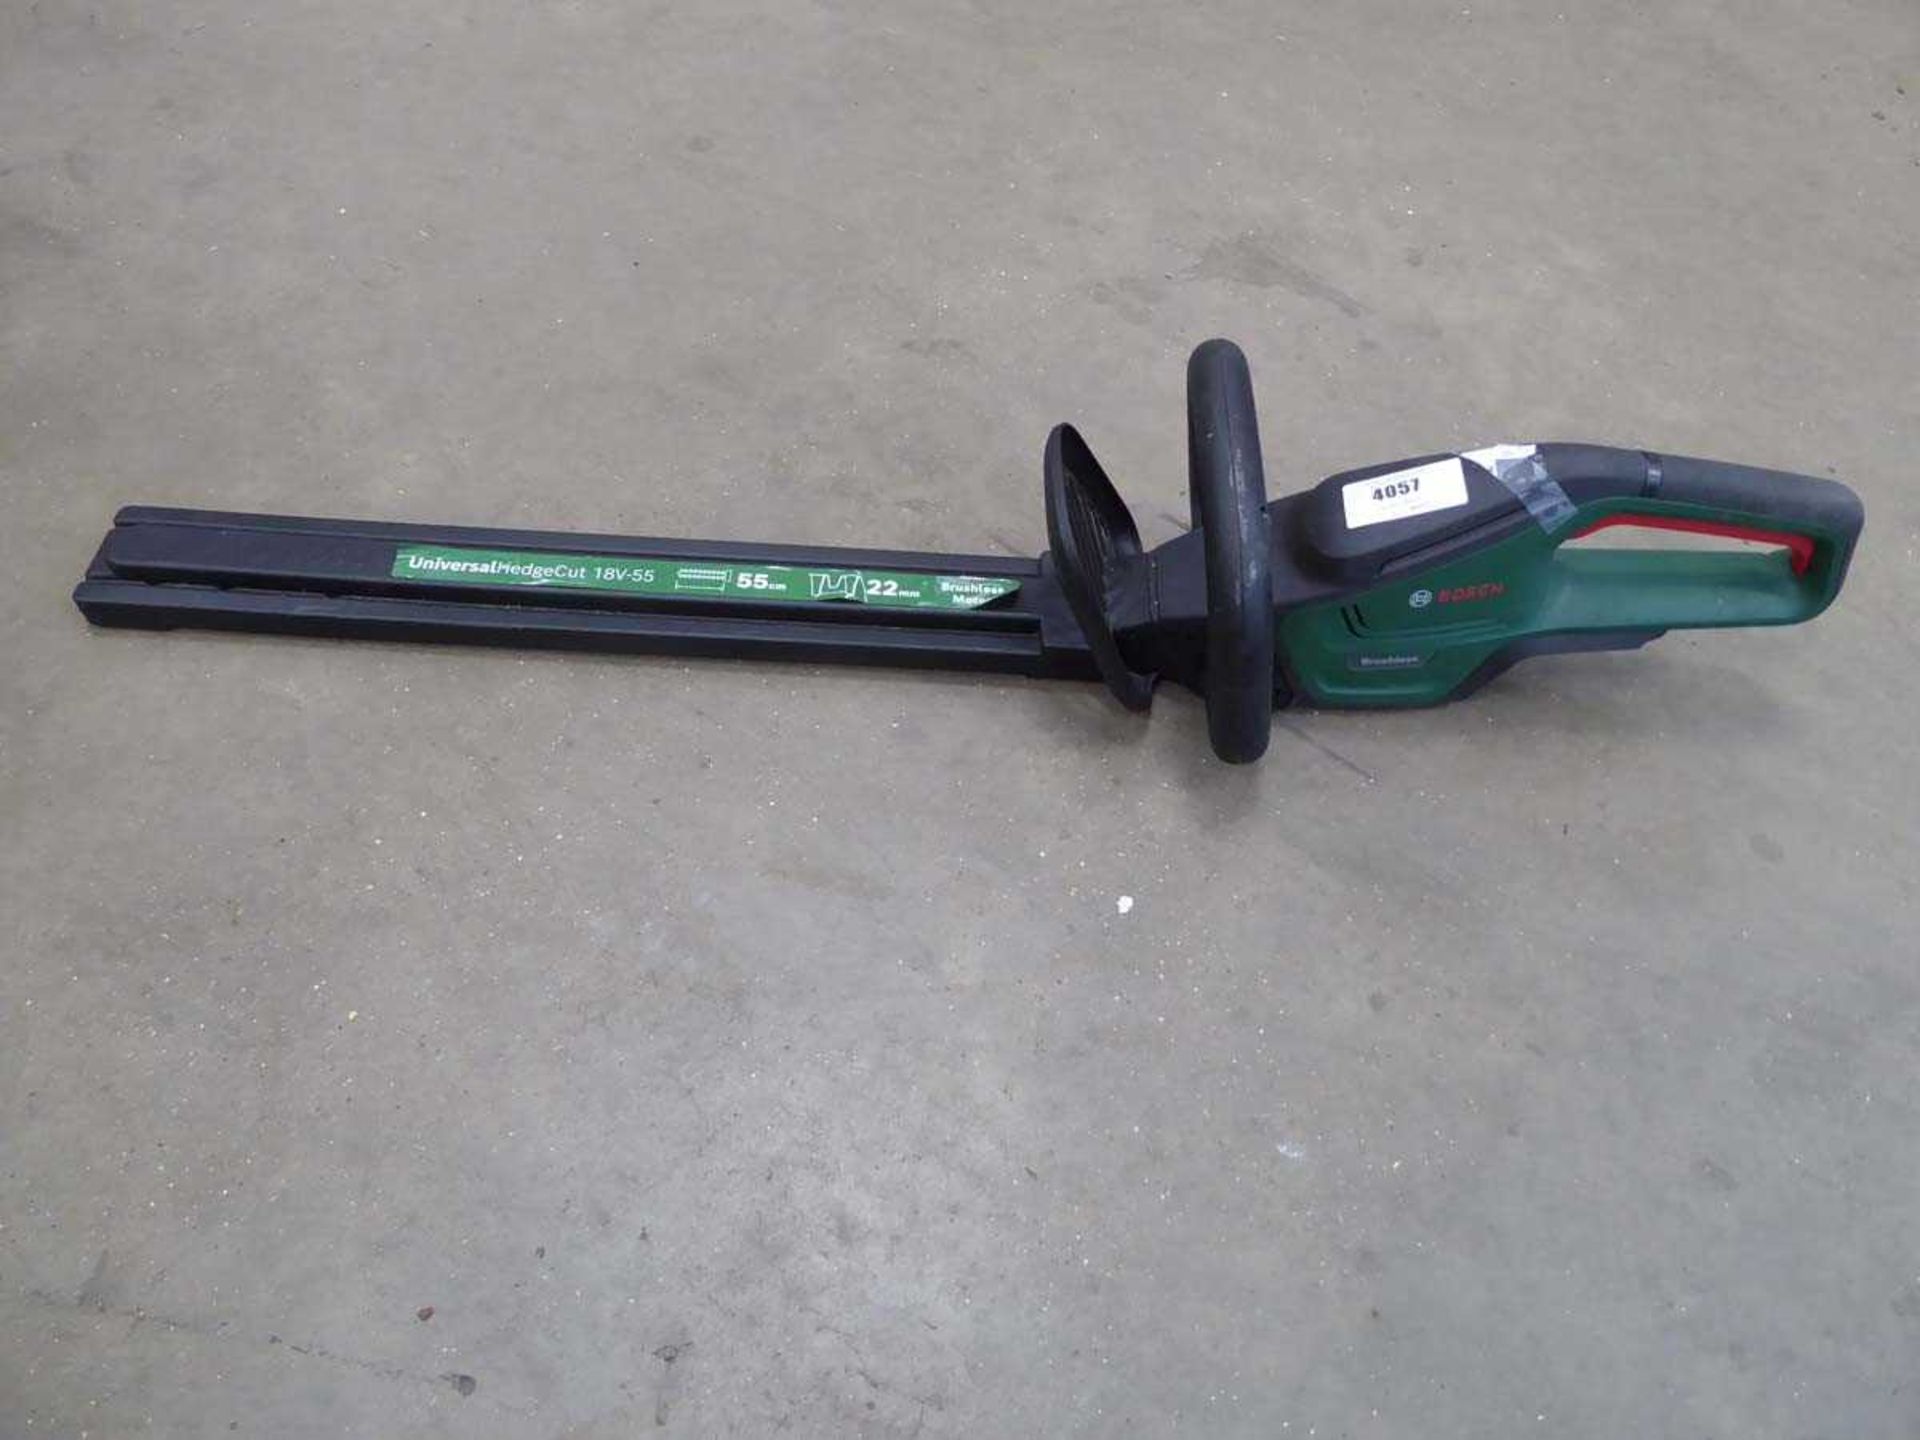 +VAT Bosch battery powered hedge cutter, no battery and no charger